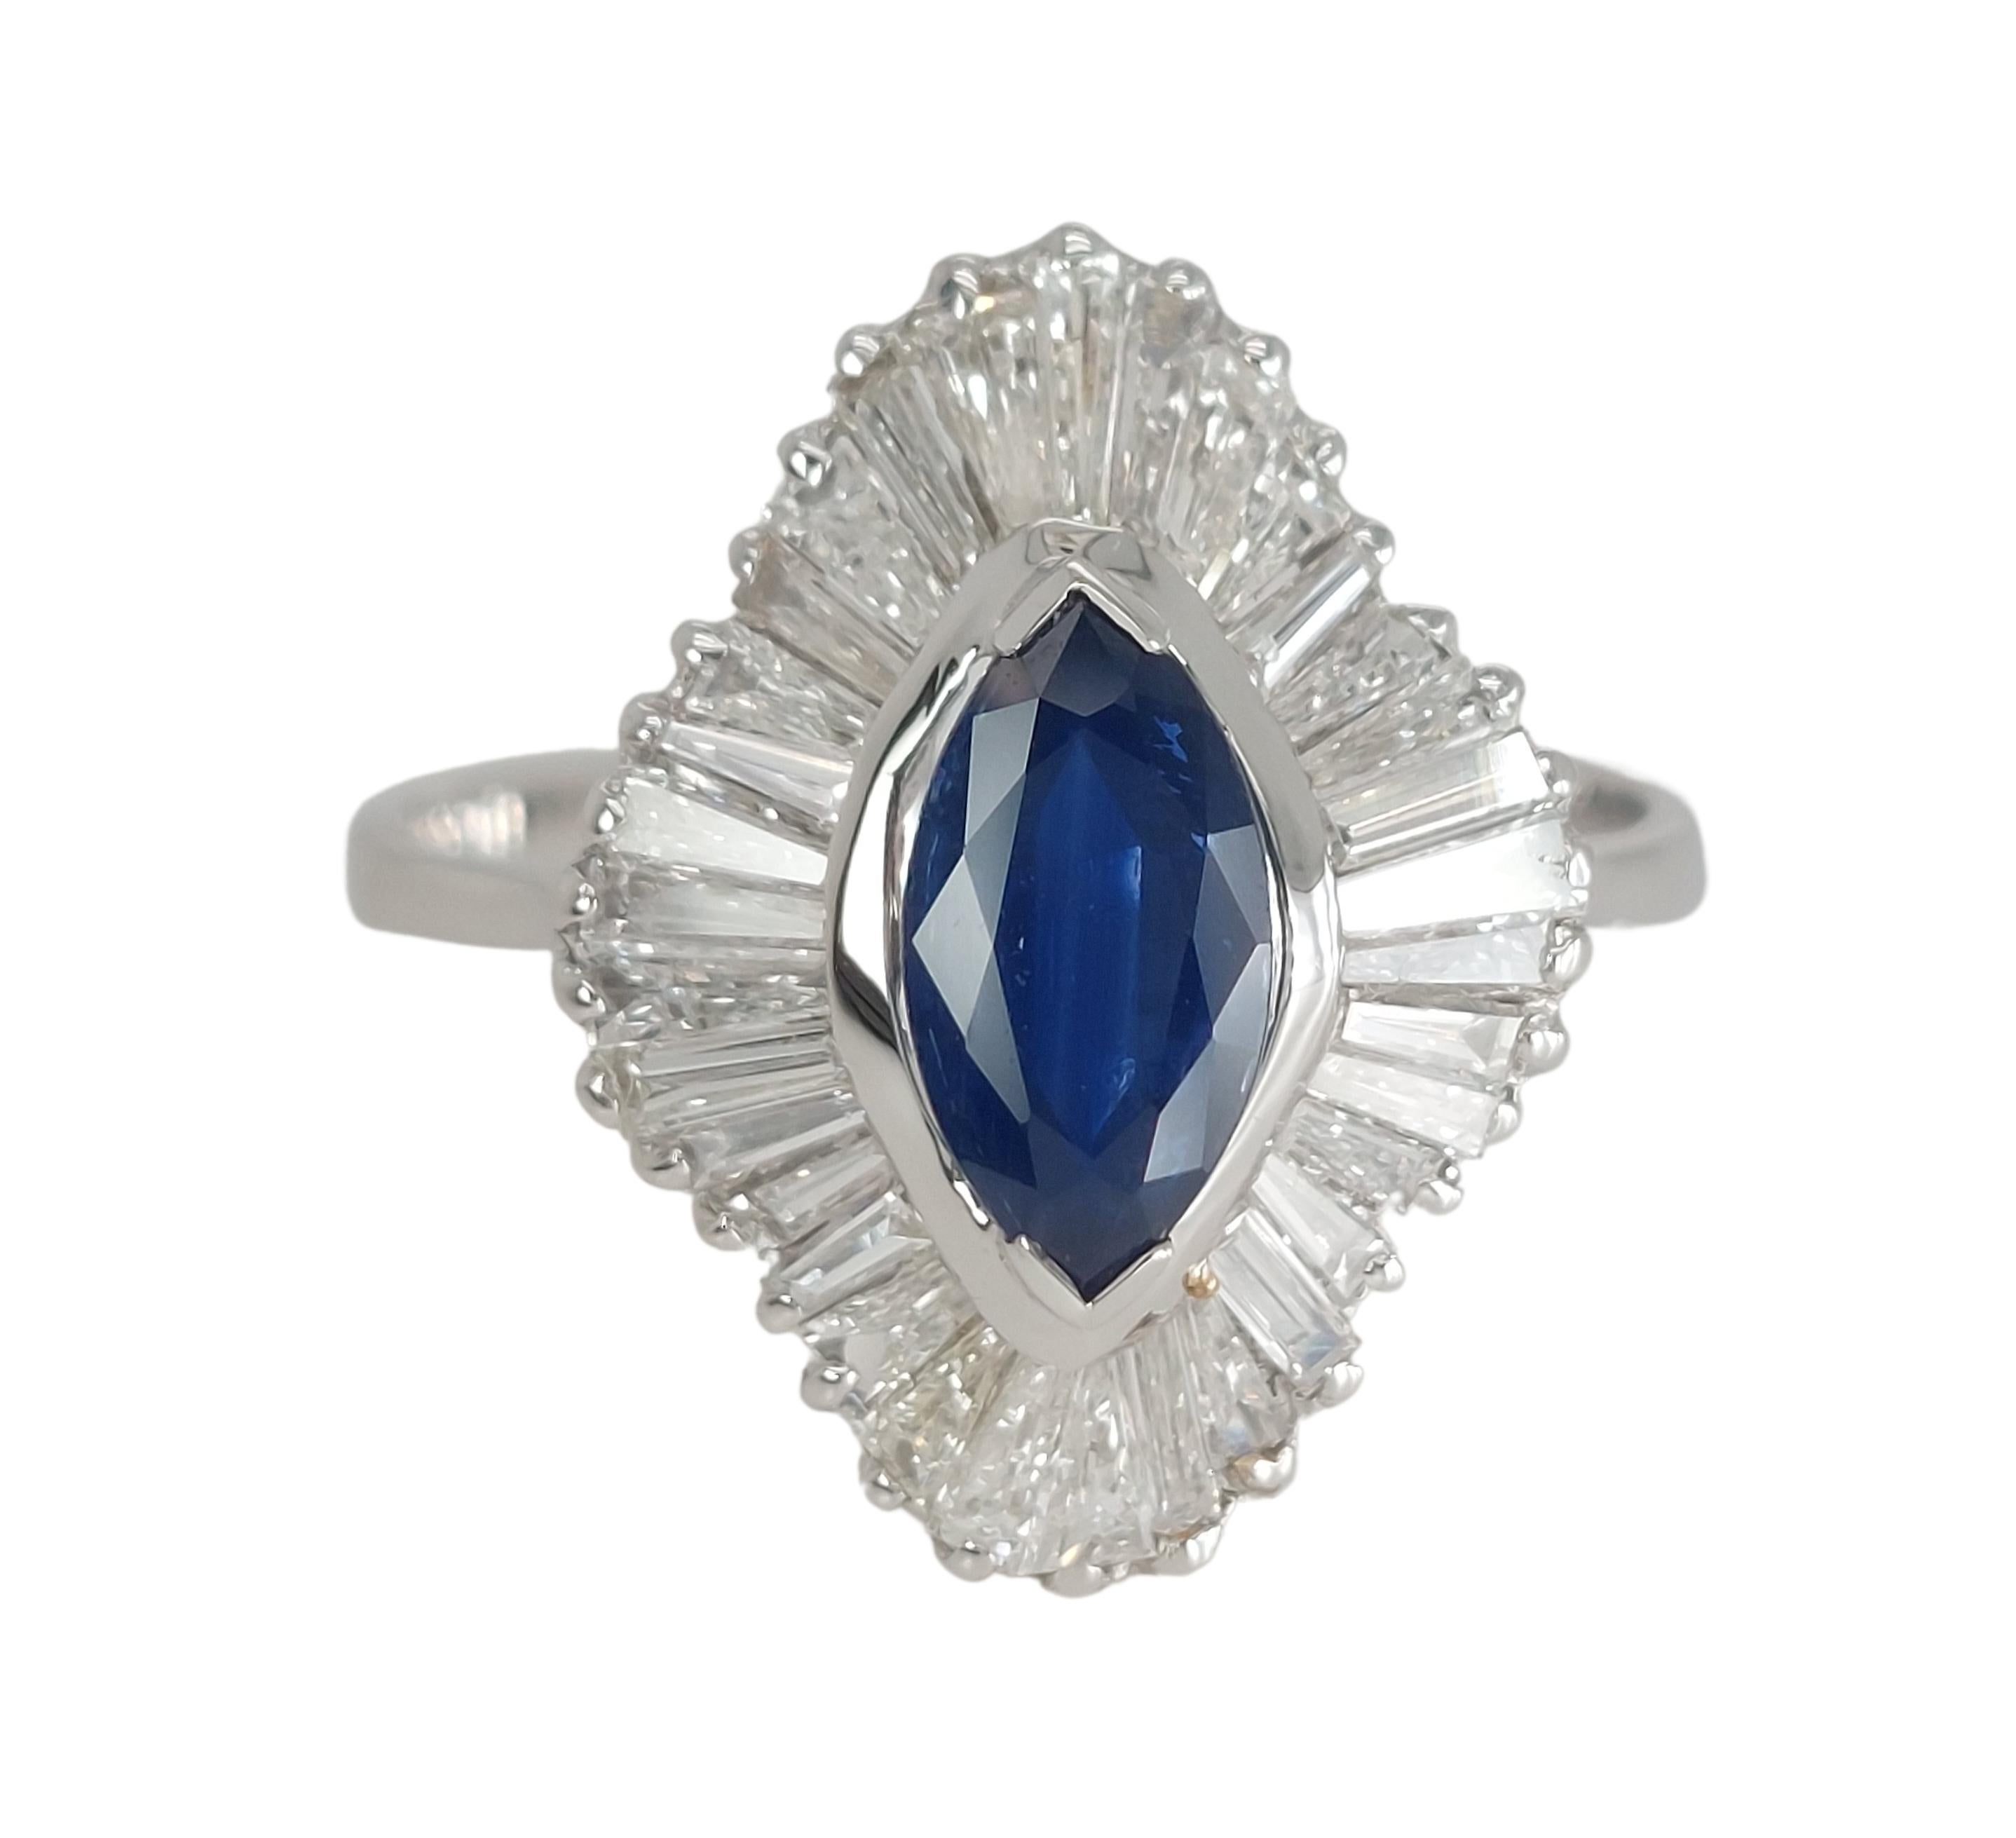 Beautiful 18kt White Gold Ring With 1.02ct Marquise Cut Sapphire and 2.4ct Diamonds 

Sapphire: Marquise cut sapphire, approx. 1.02ct

Diamonds: Baguette cut diamonds, together approx. 2.40ct

Material: 18kt white gold

Ring size: 56 EU / 7.75 US (